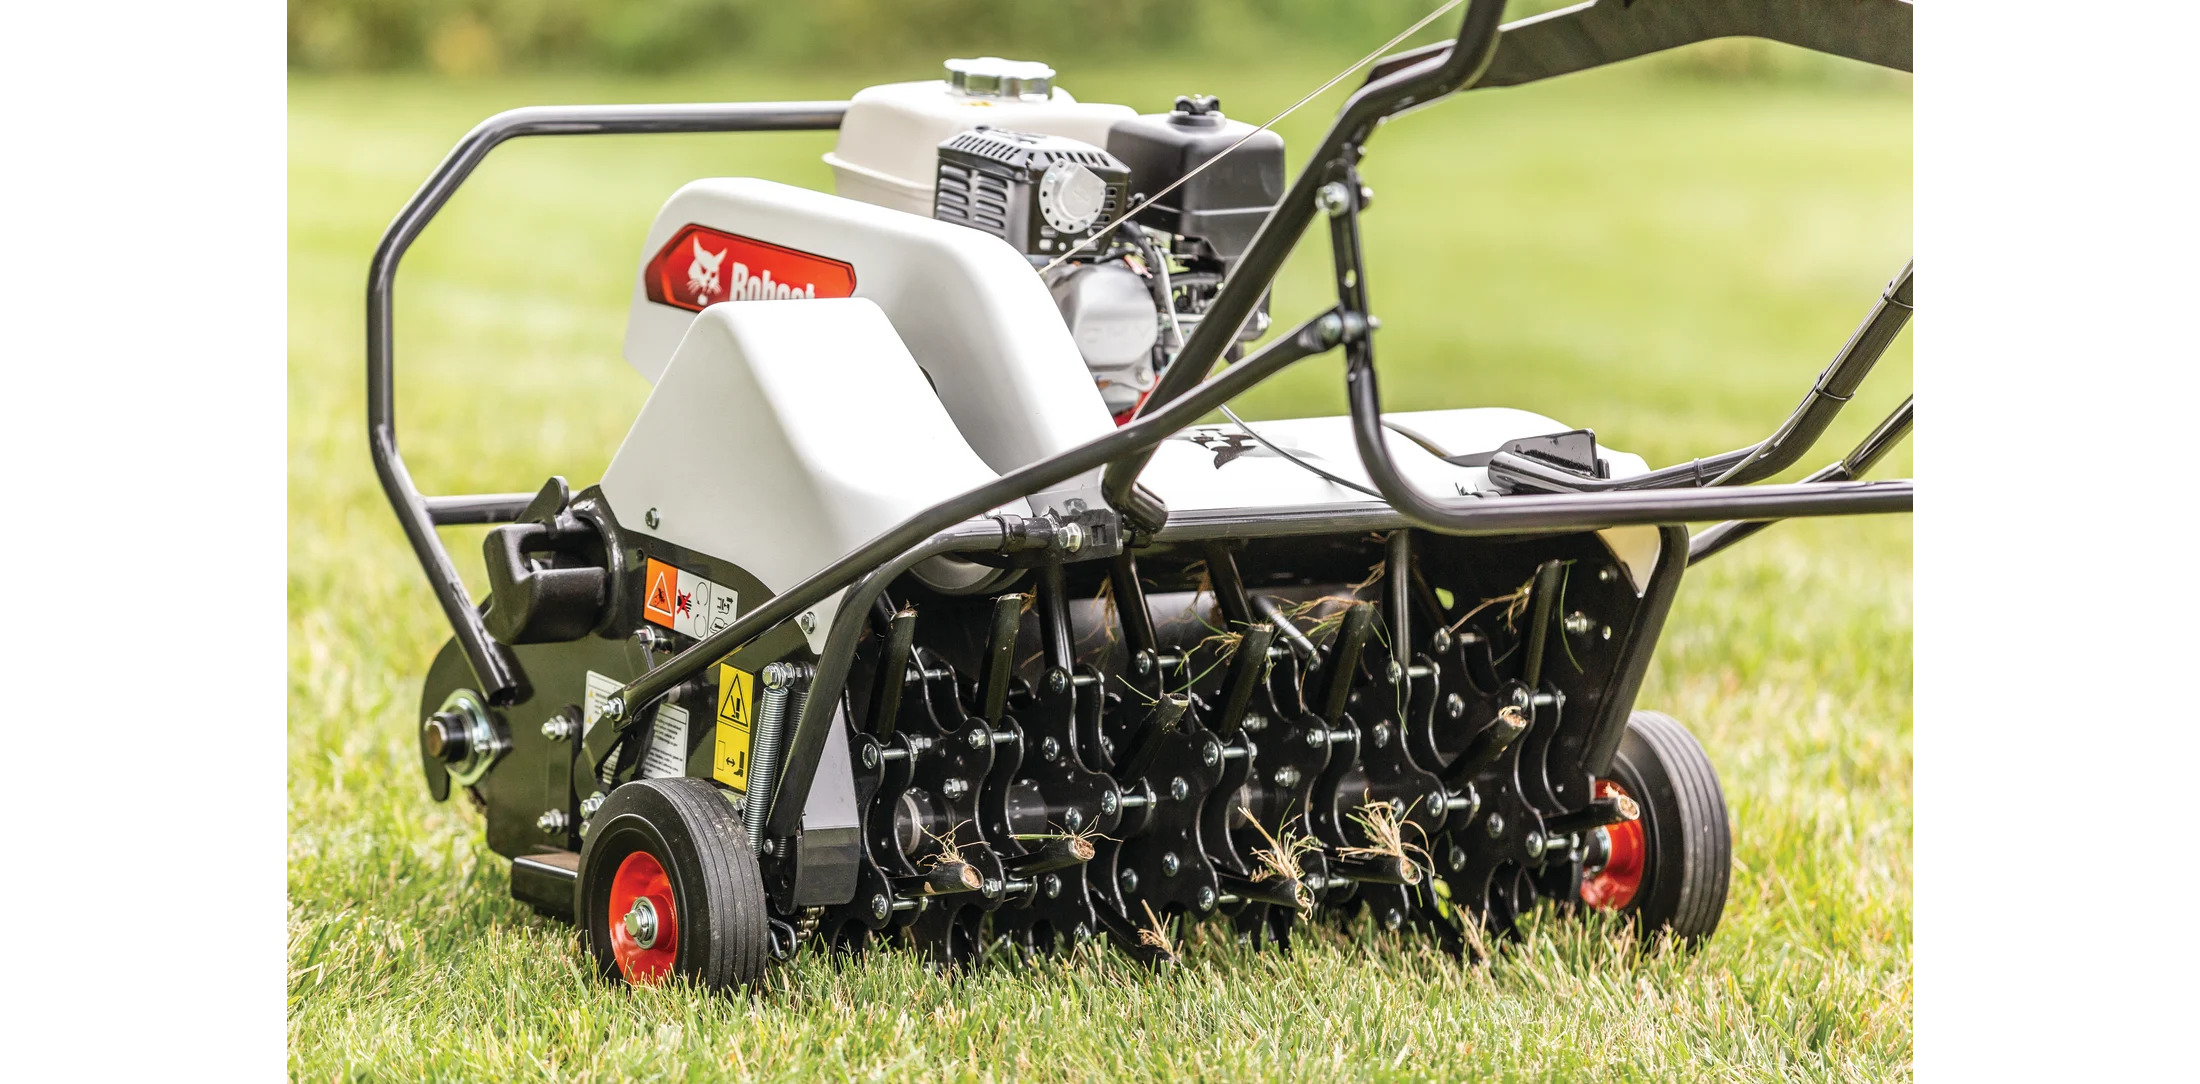 Browse Specs and more for the Bobcat AE26 Walk-Behind Aerator - Bobcat of Indy